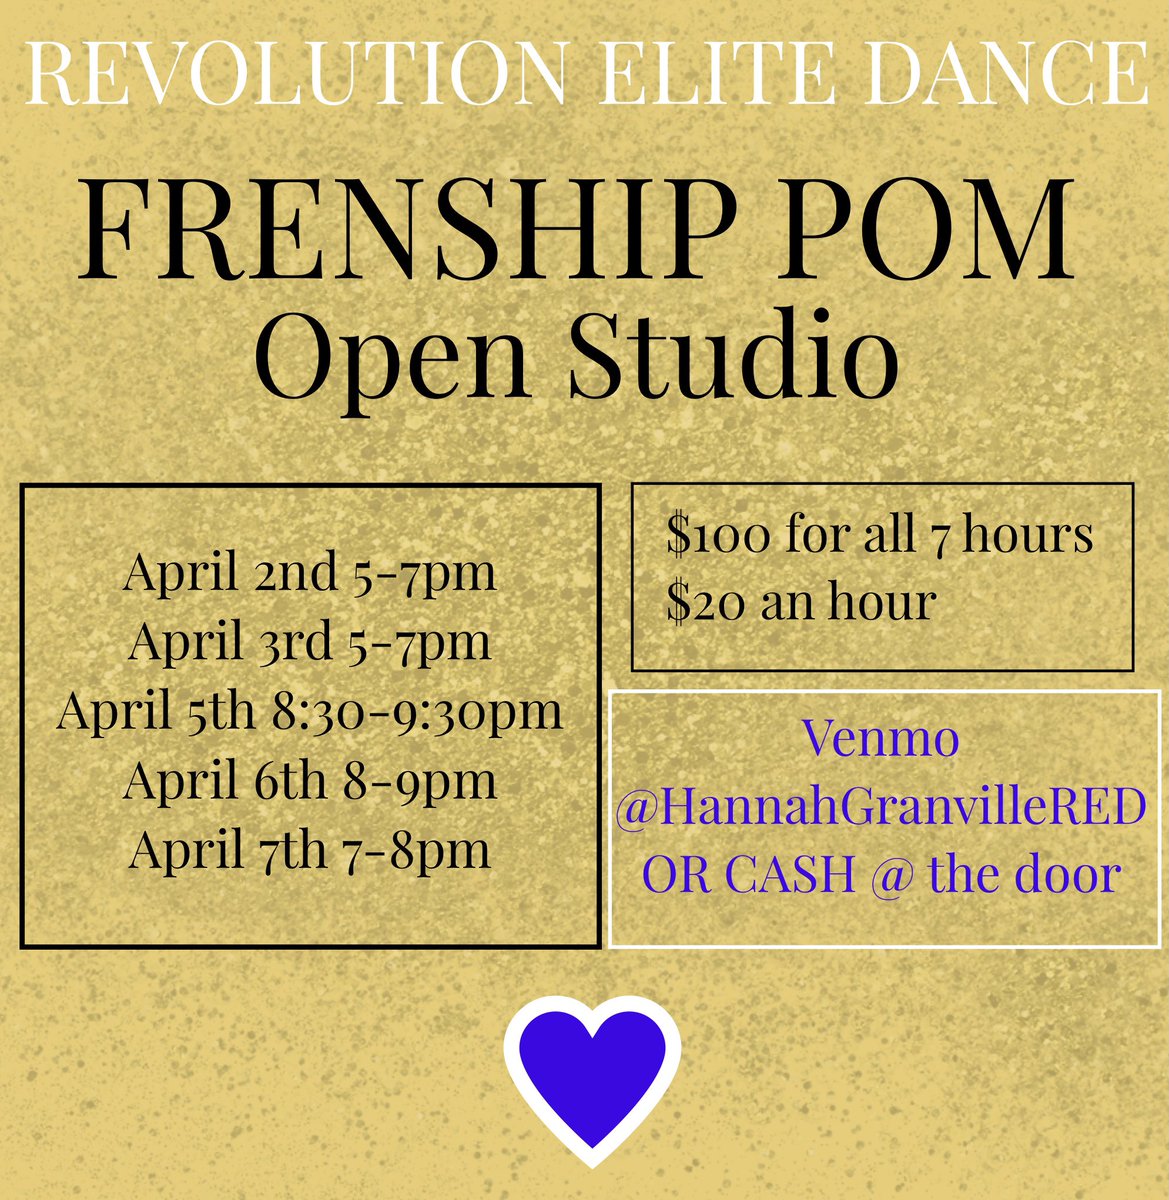 REVOLUTION ELITE DANCE FRENSHIP POM OPEN STUDIO Frenship Pom 2021-2022 - OPEN TO THE PUBLIC! Where: Revolution Elite Dance - 5614 126th Street Lubbock, TX 79424 - 806.702.8295 You can sign up at the front desk during office hours or pay the day of if spots are still available.